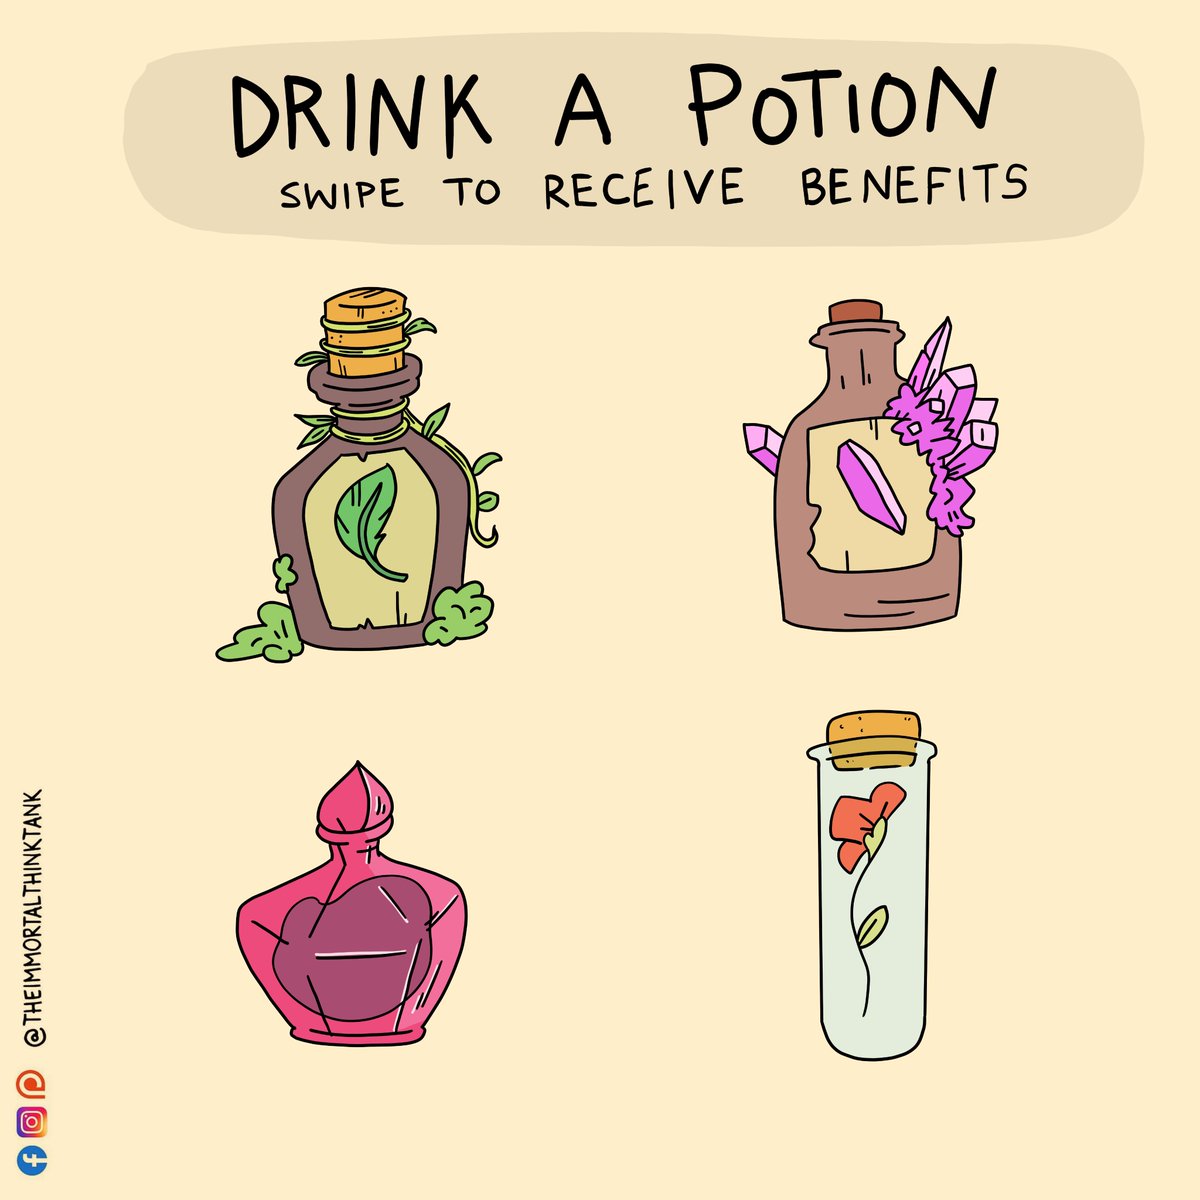 Drink a potion then check replies to see the benefits

#dnd #dungeonsanddragons #comics #tagyourself